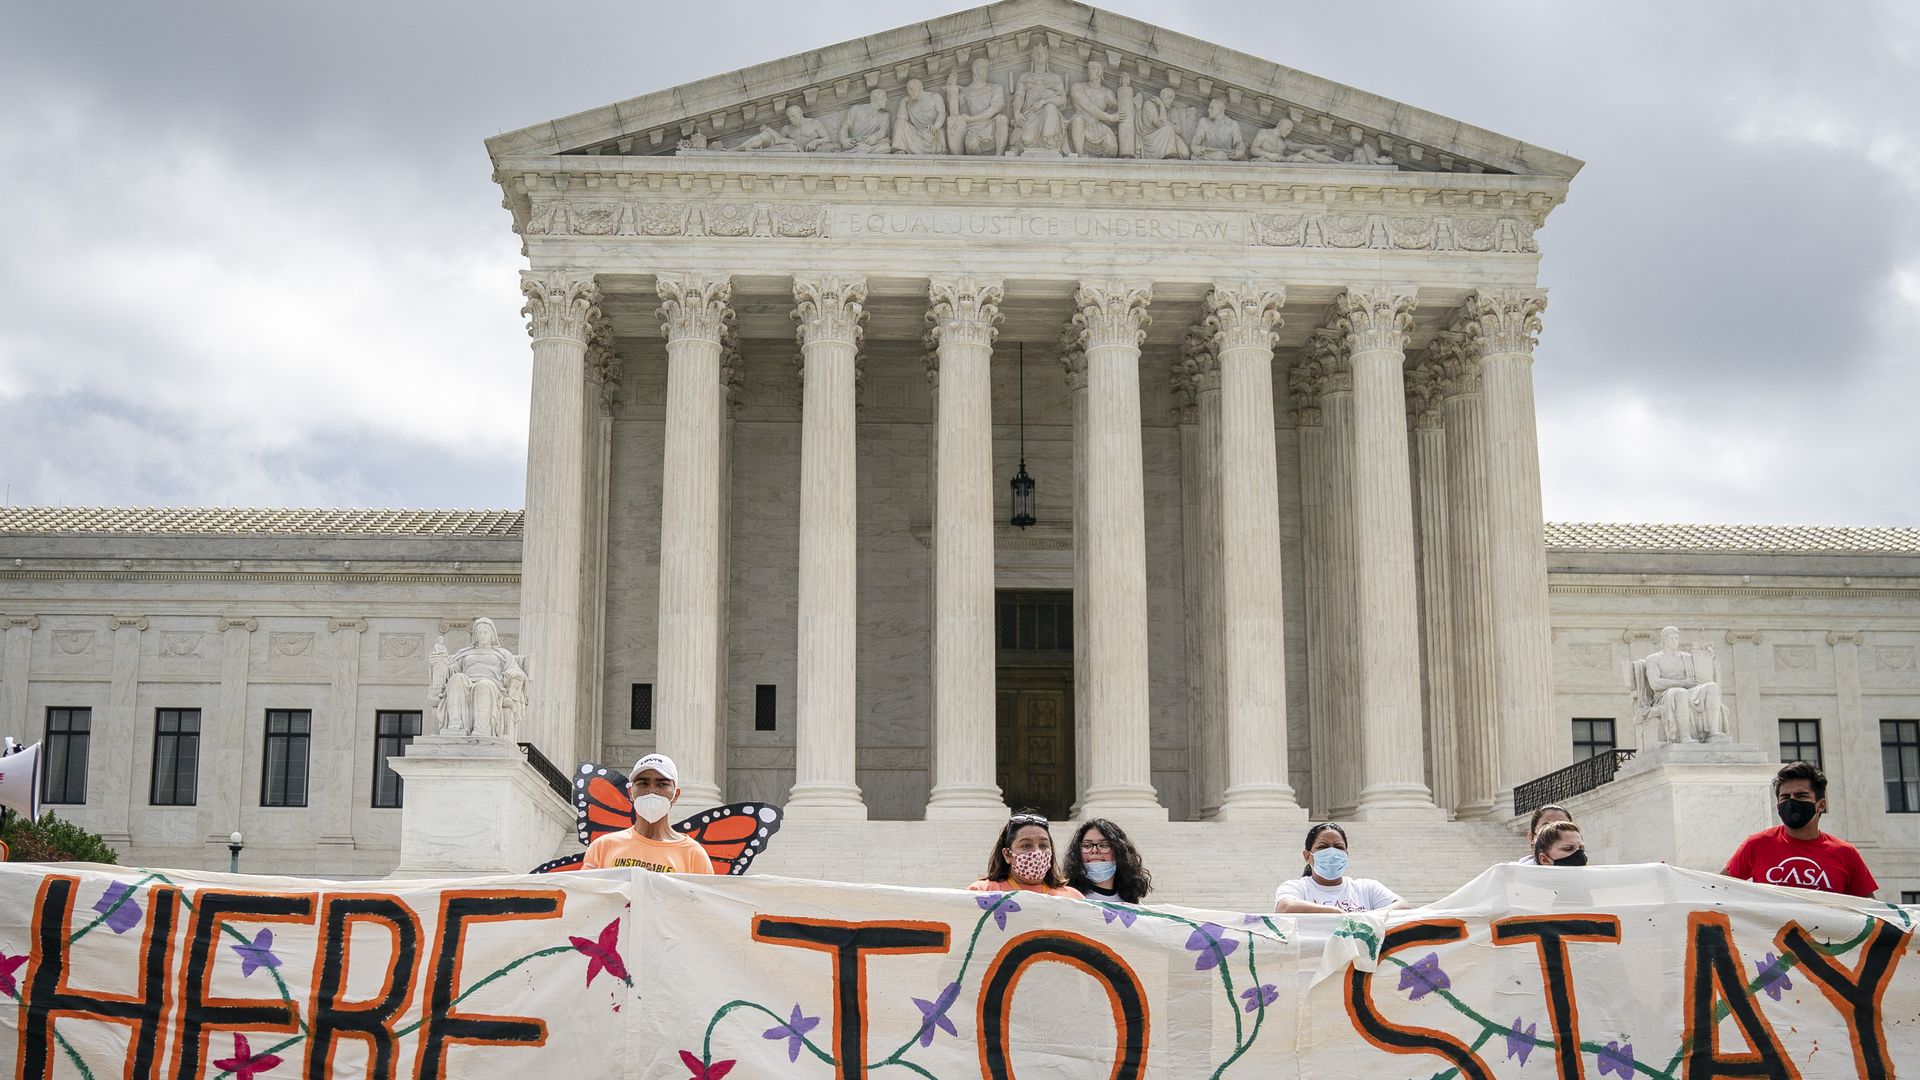 Immigration activists hold a banner that says "here to stay" in front of the Supreme Court.